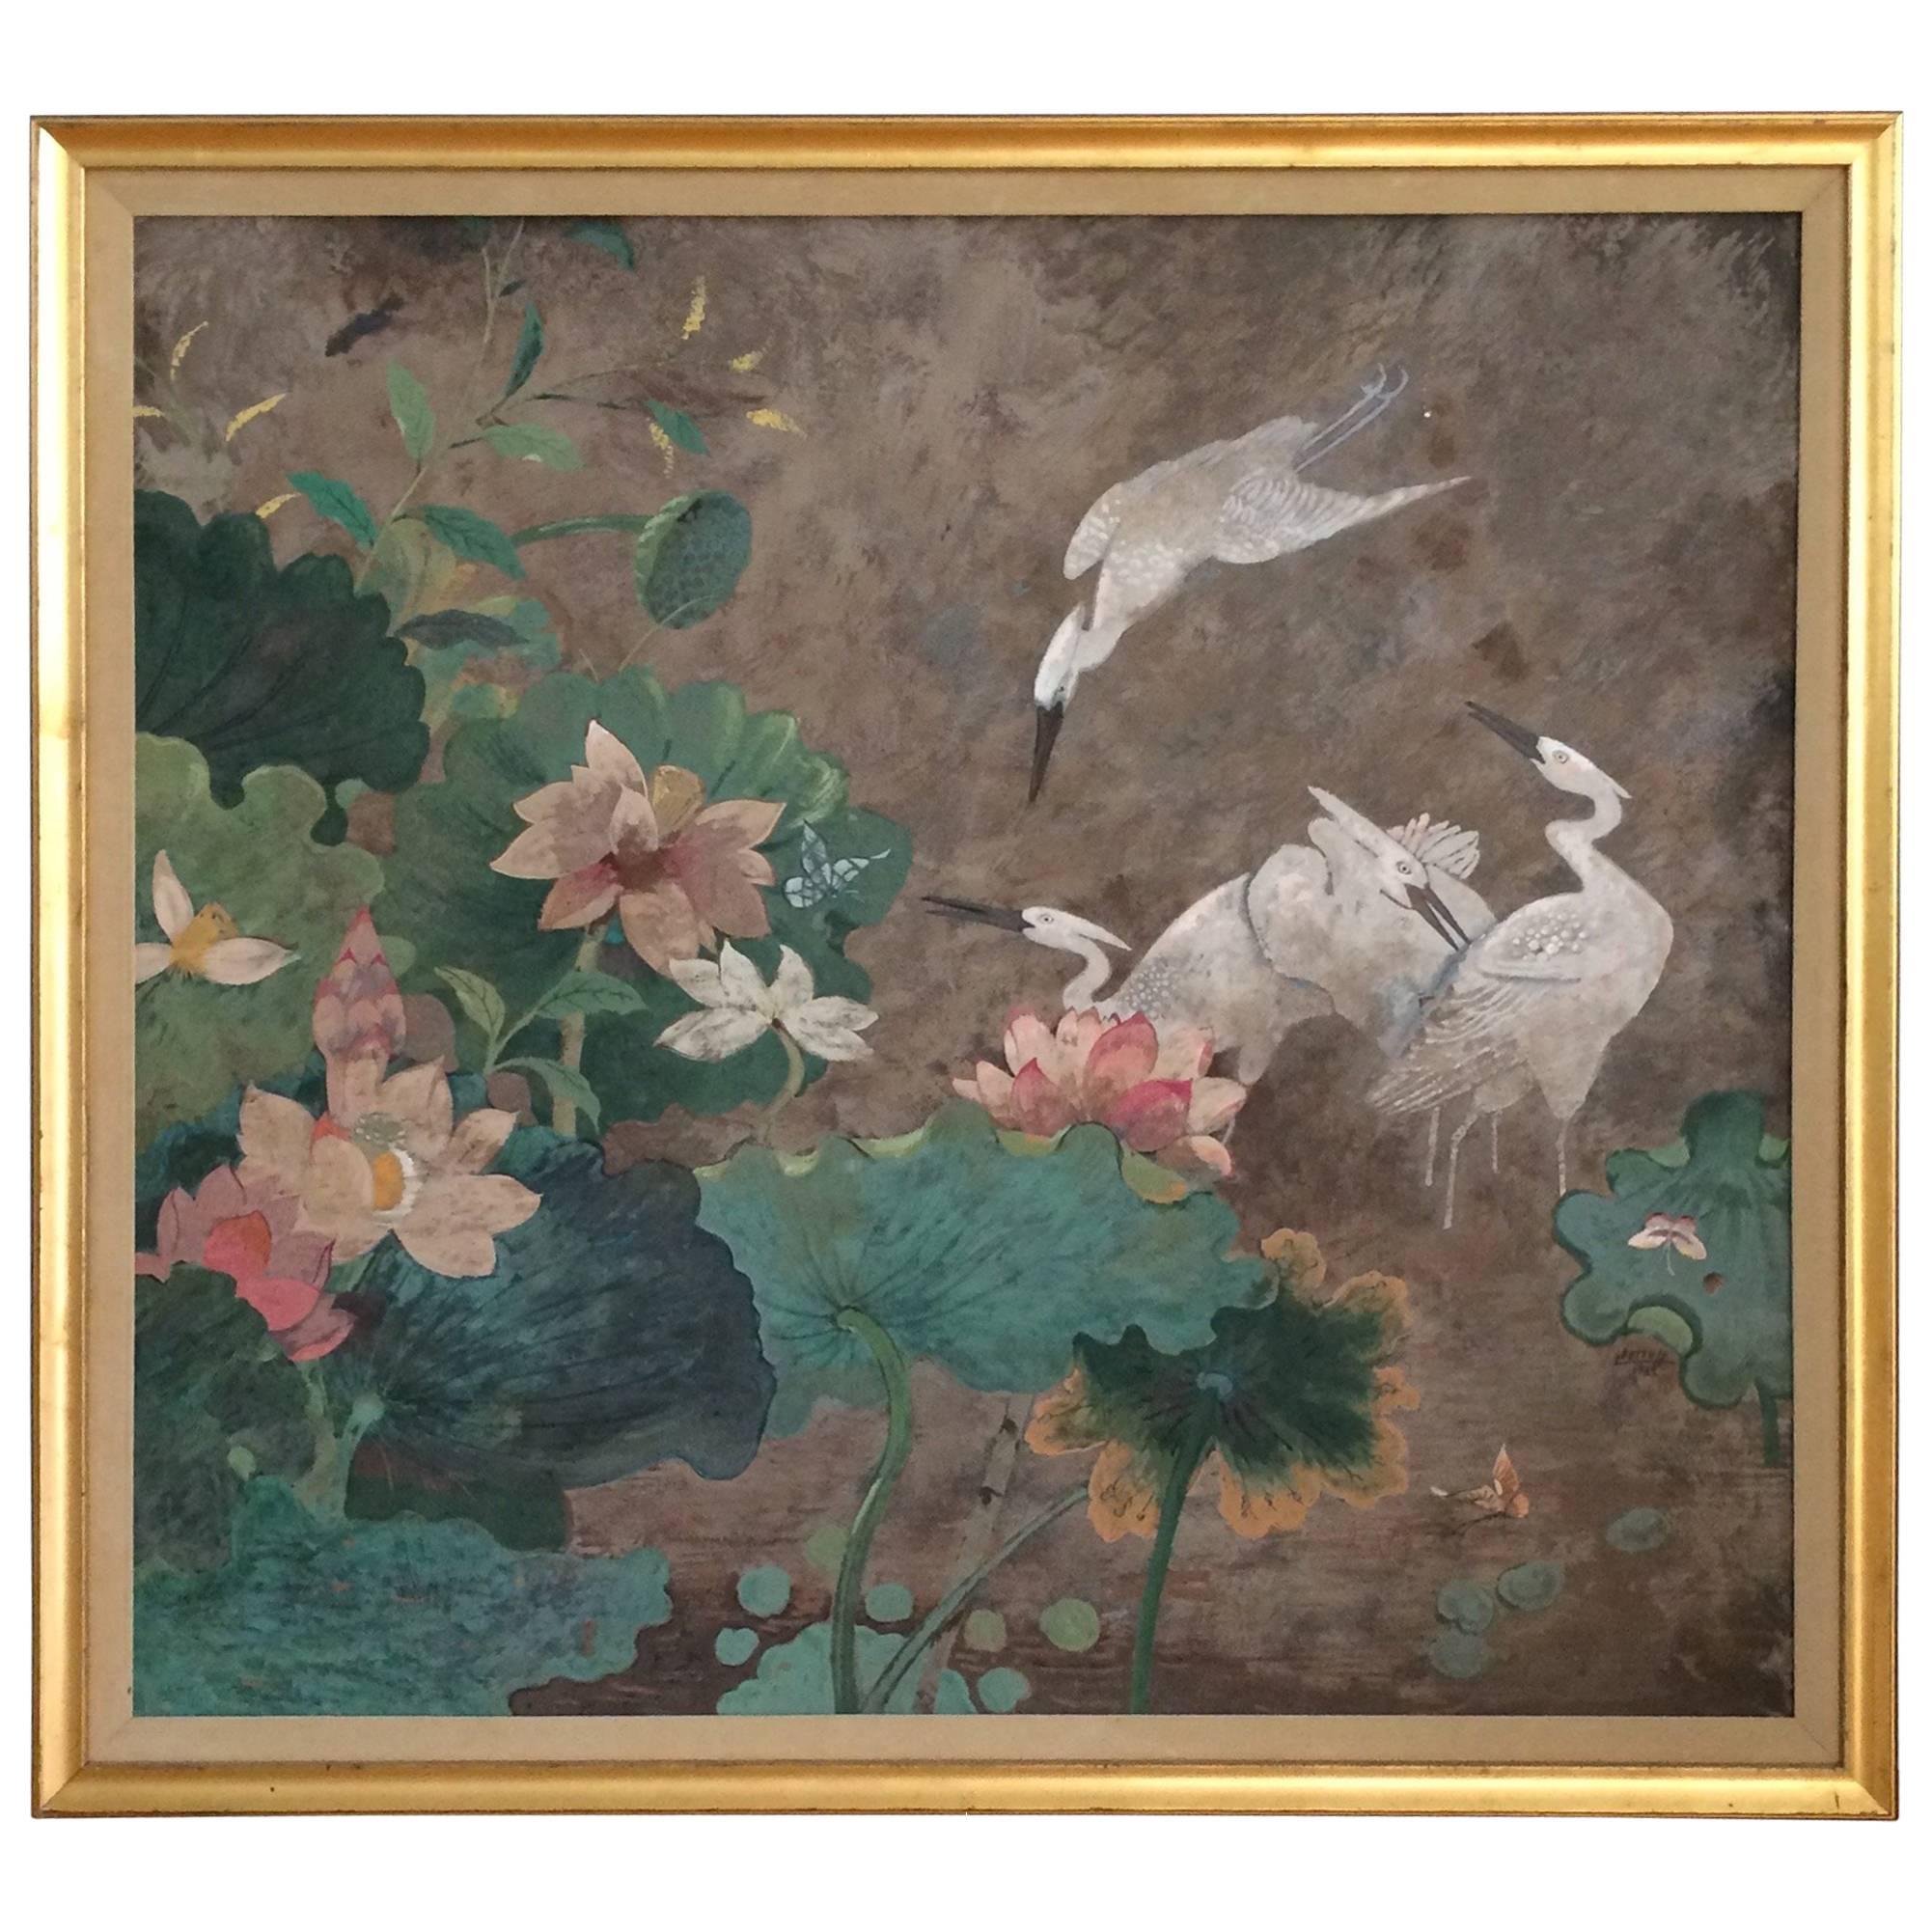 Magnificent Original Painting of Cranes and Flowers